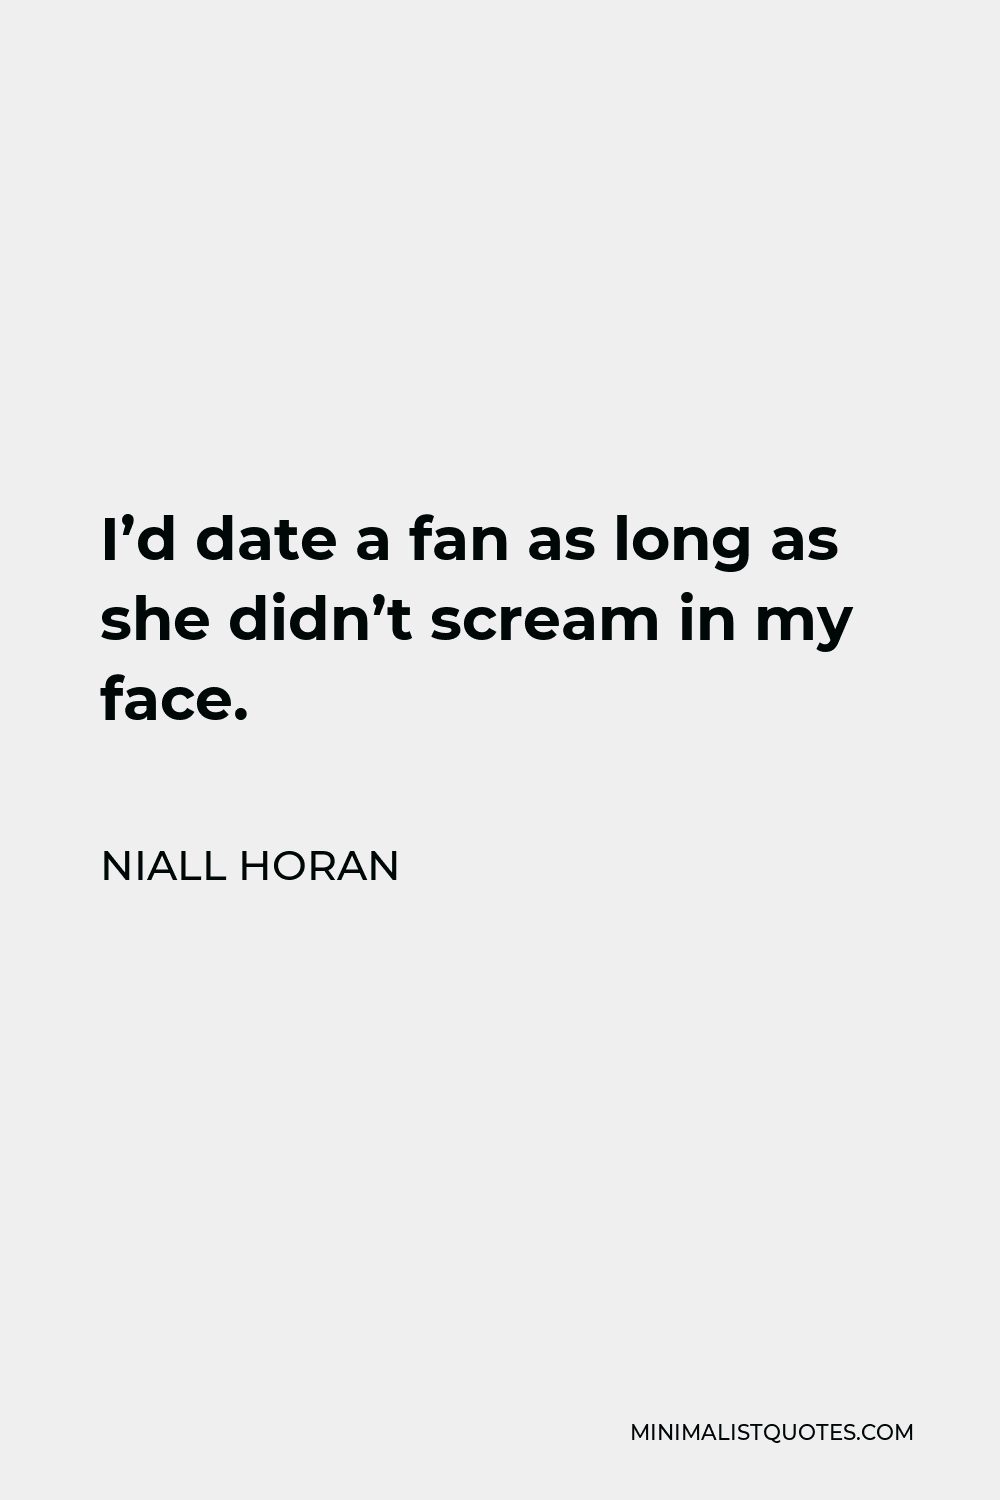 Niall Horan Quote - I’d date a fan as long as she didn’t scream in my face.